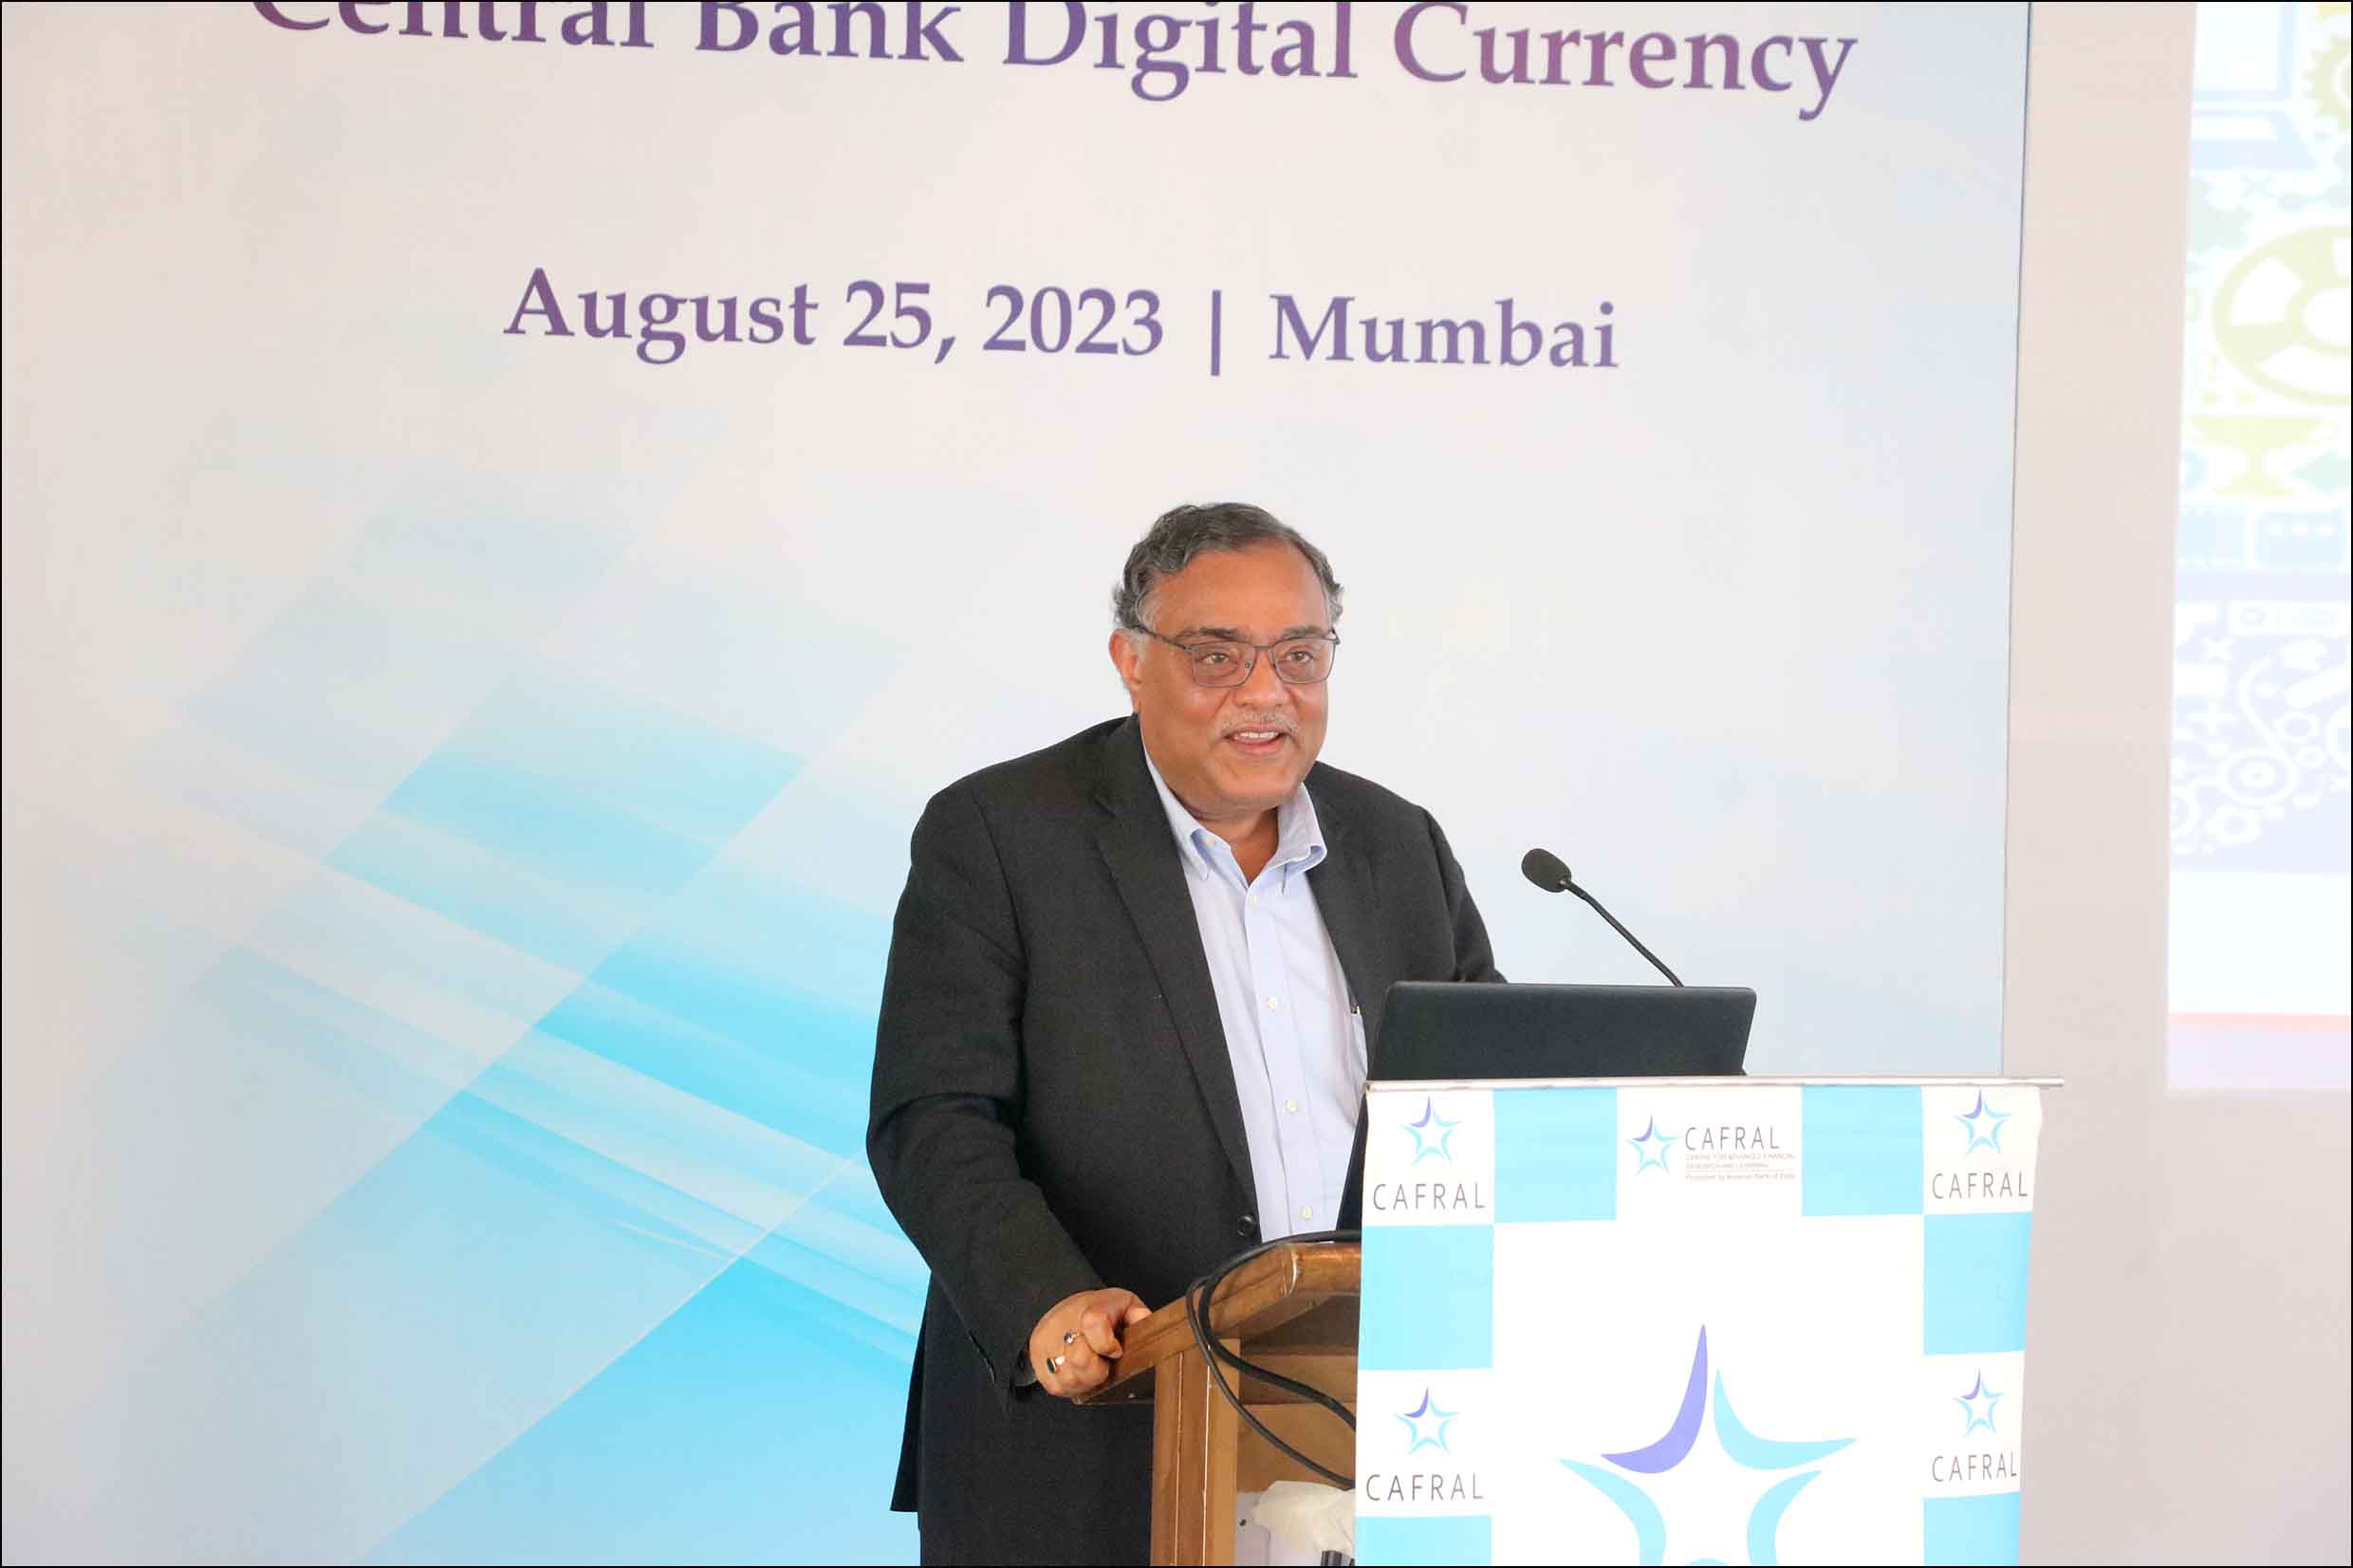 Photos from the Conference on Central Bank Digital Currency